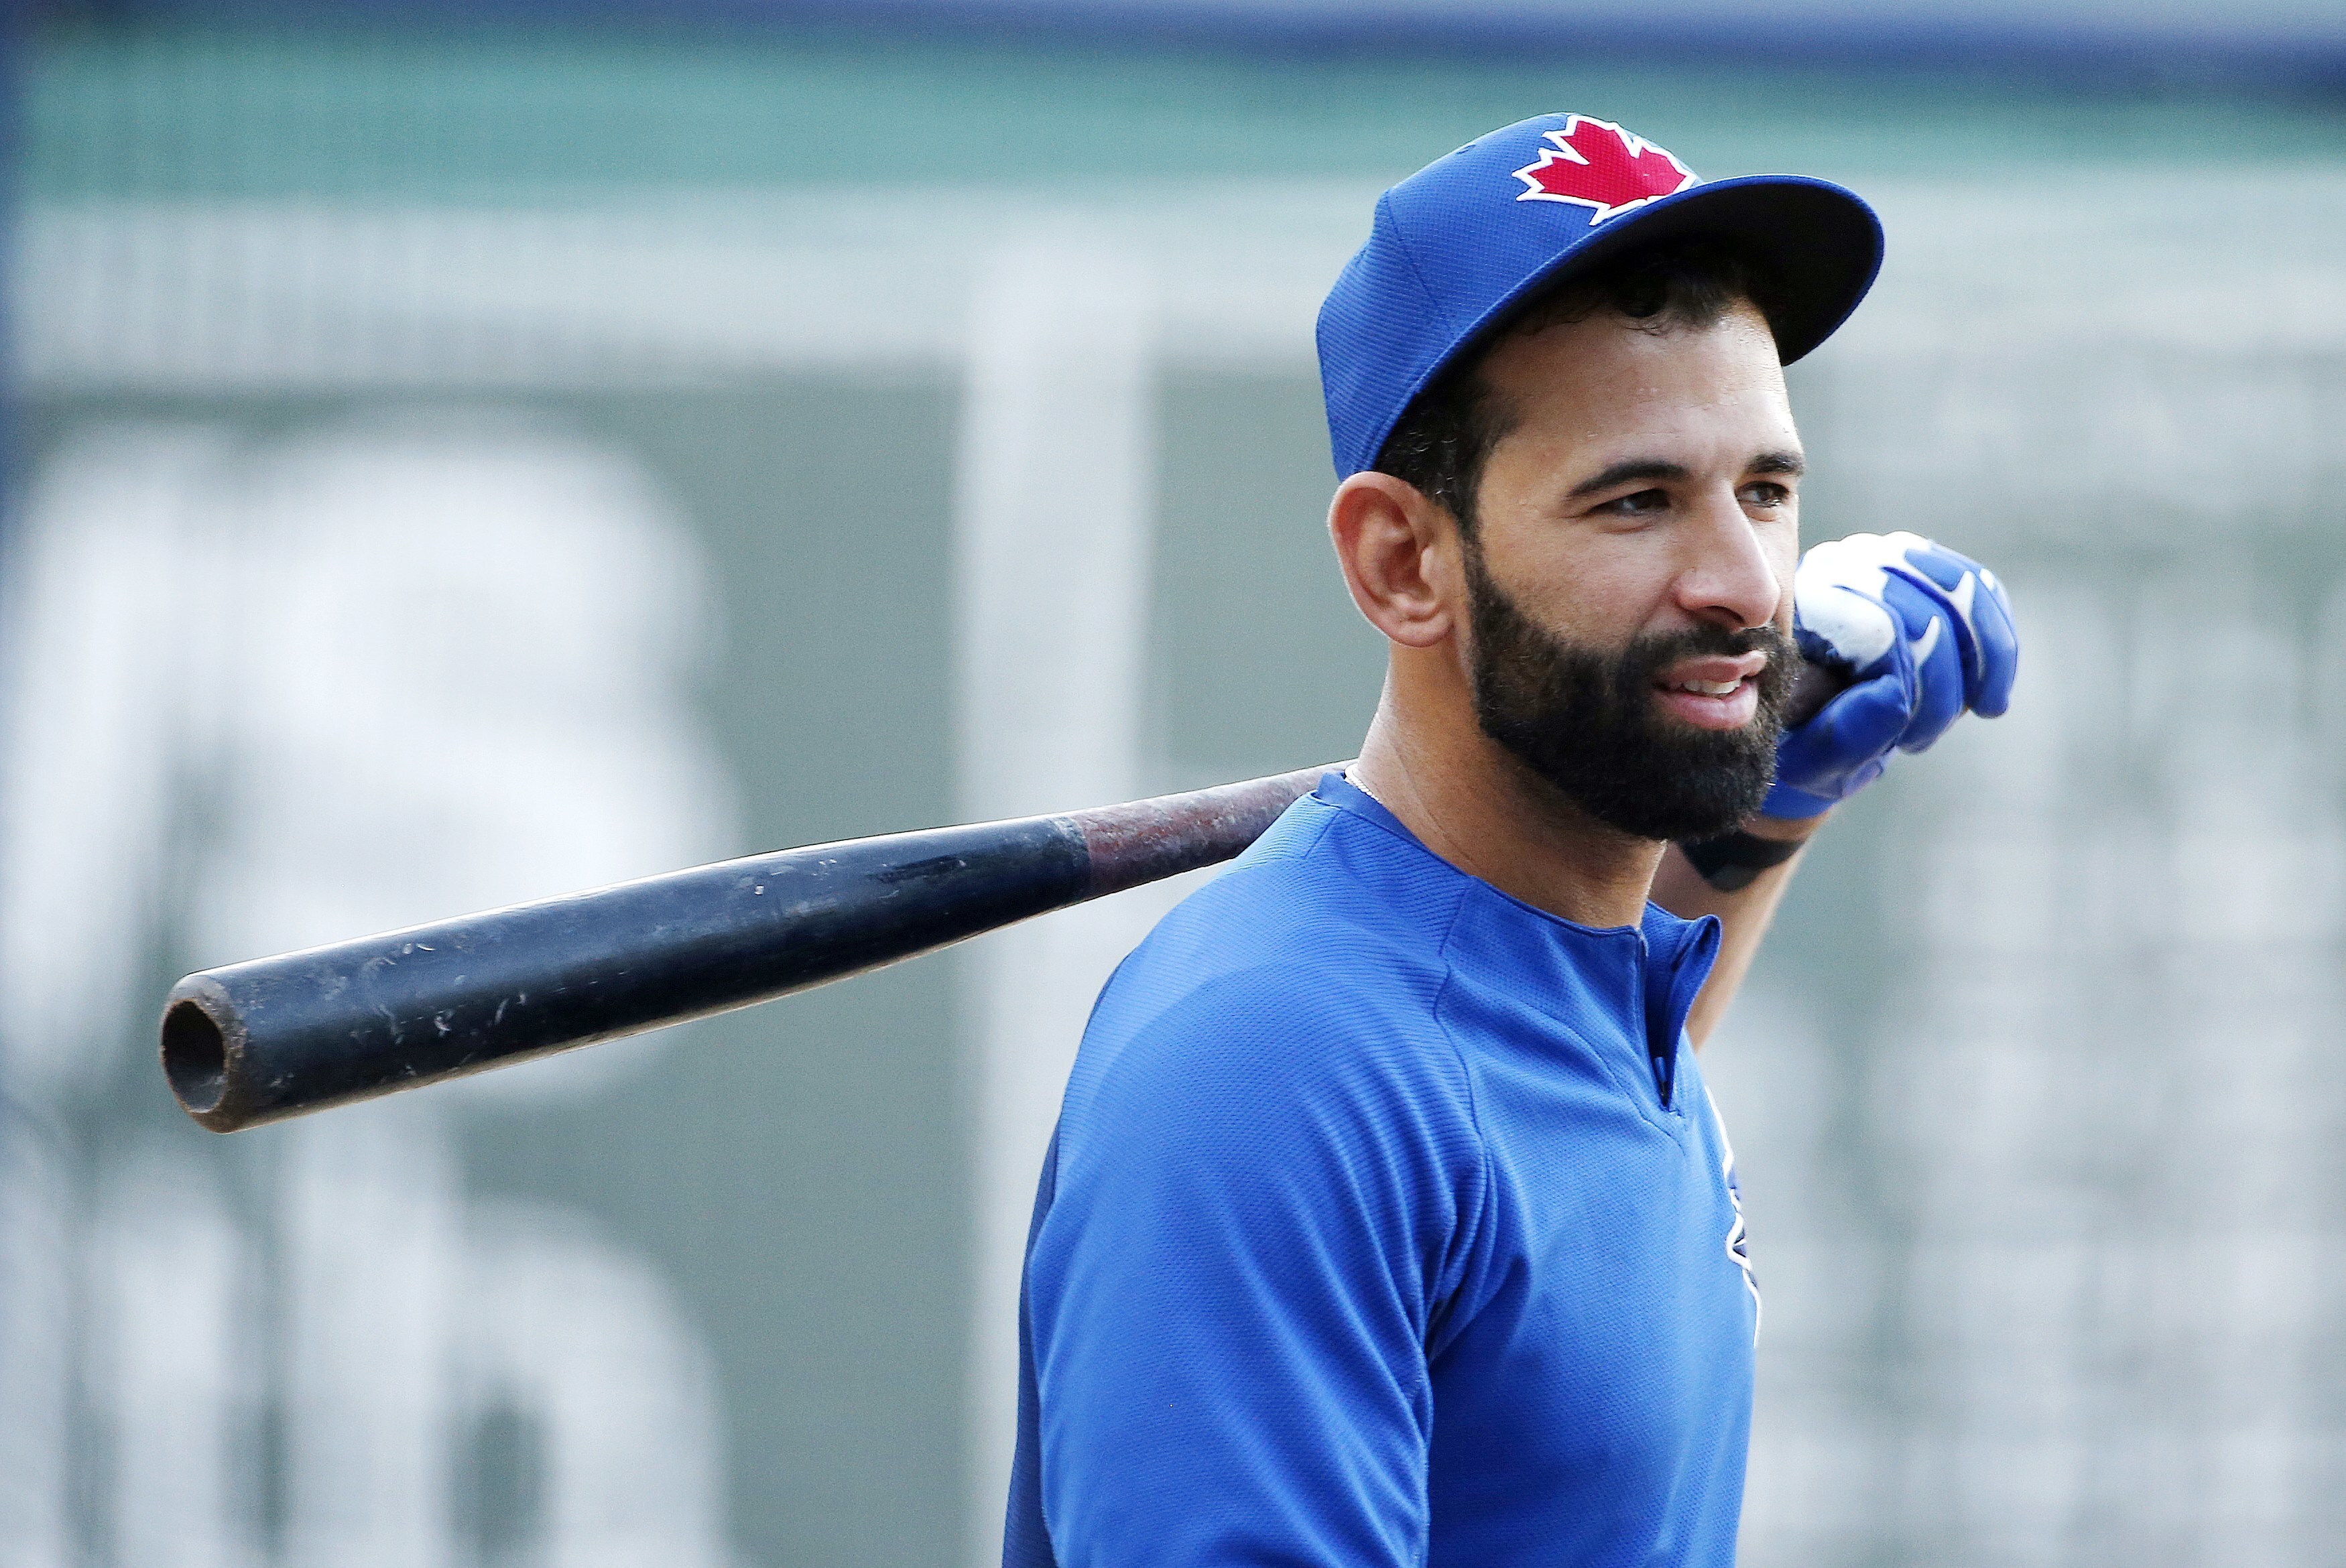 Former Toronto Blue Jays player Jose Bautista, left, signs a fan's jersey  before the Jays take on the Chicago Cubs in Toronto, Friday, Aug. 11 2023.  The Jays will honor Bautista's legacy